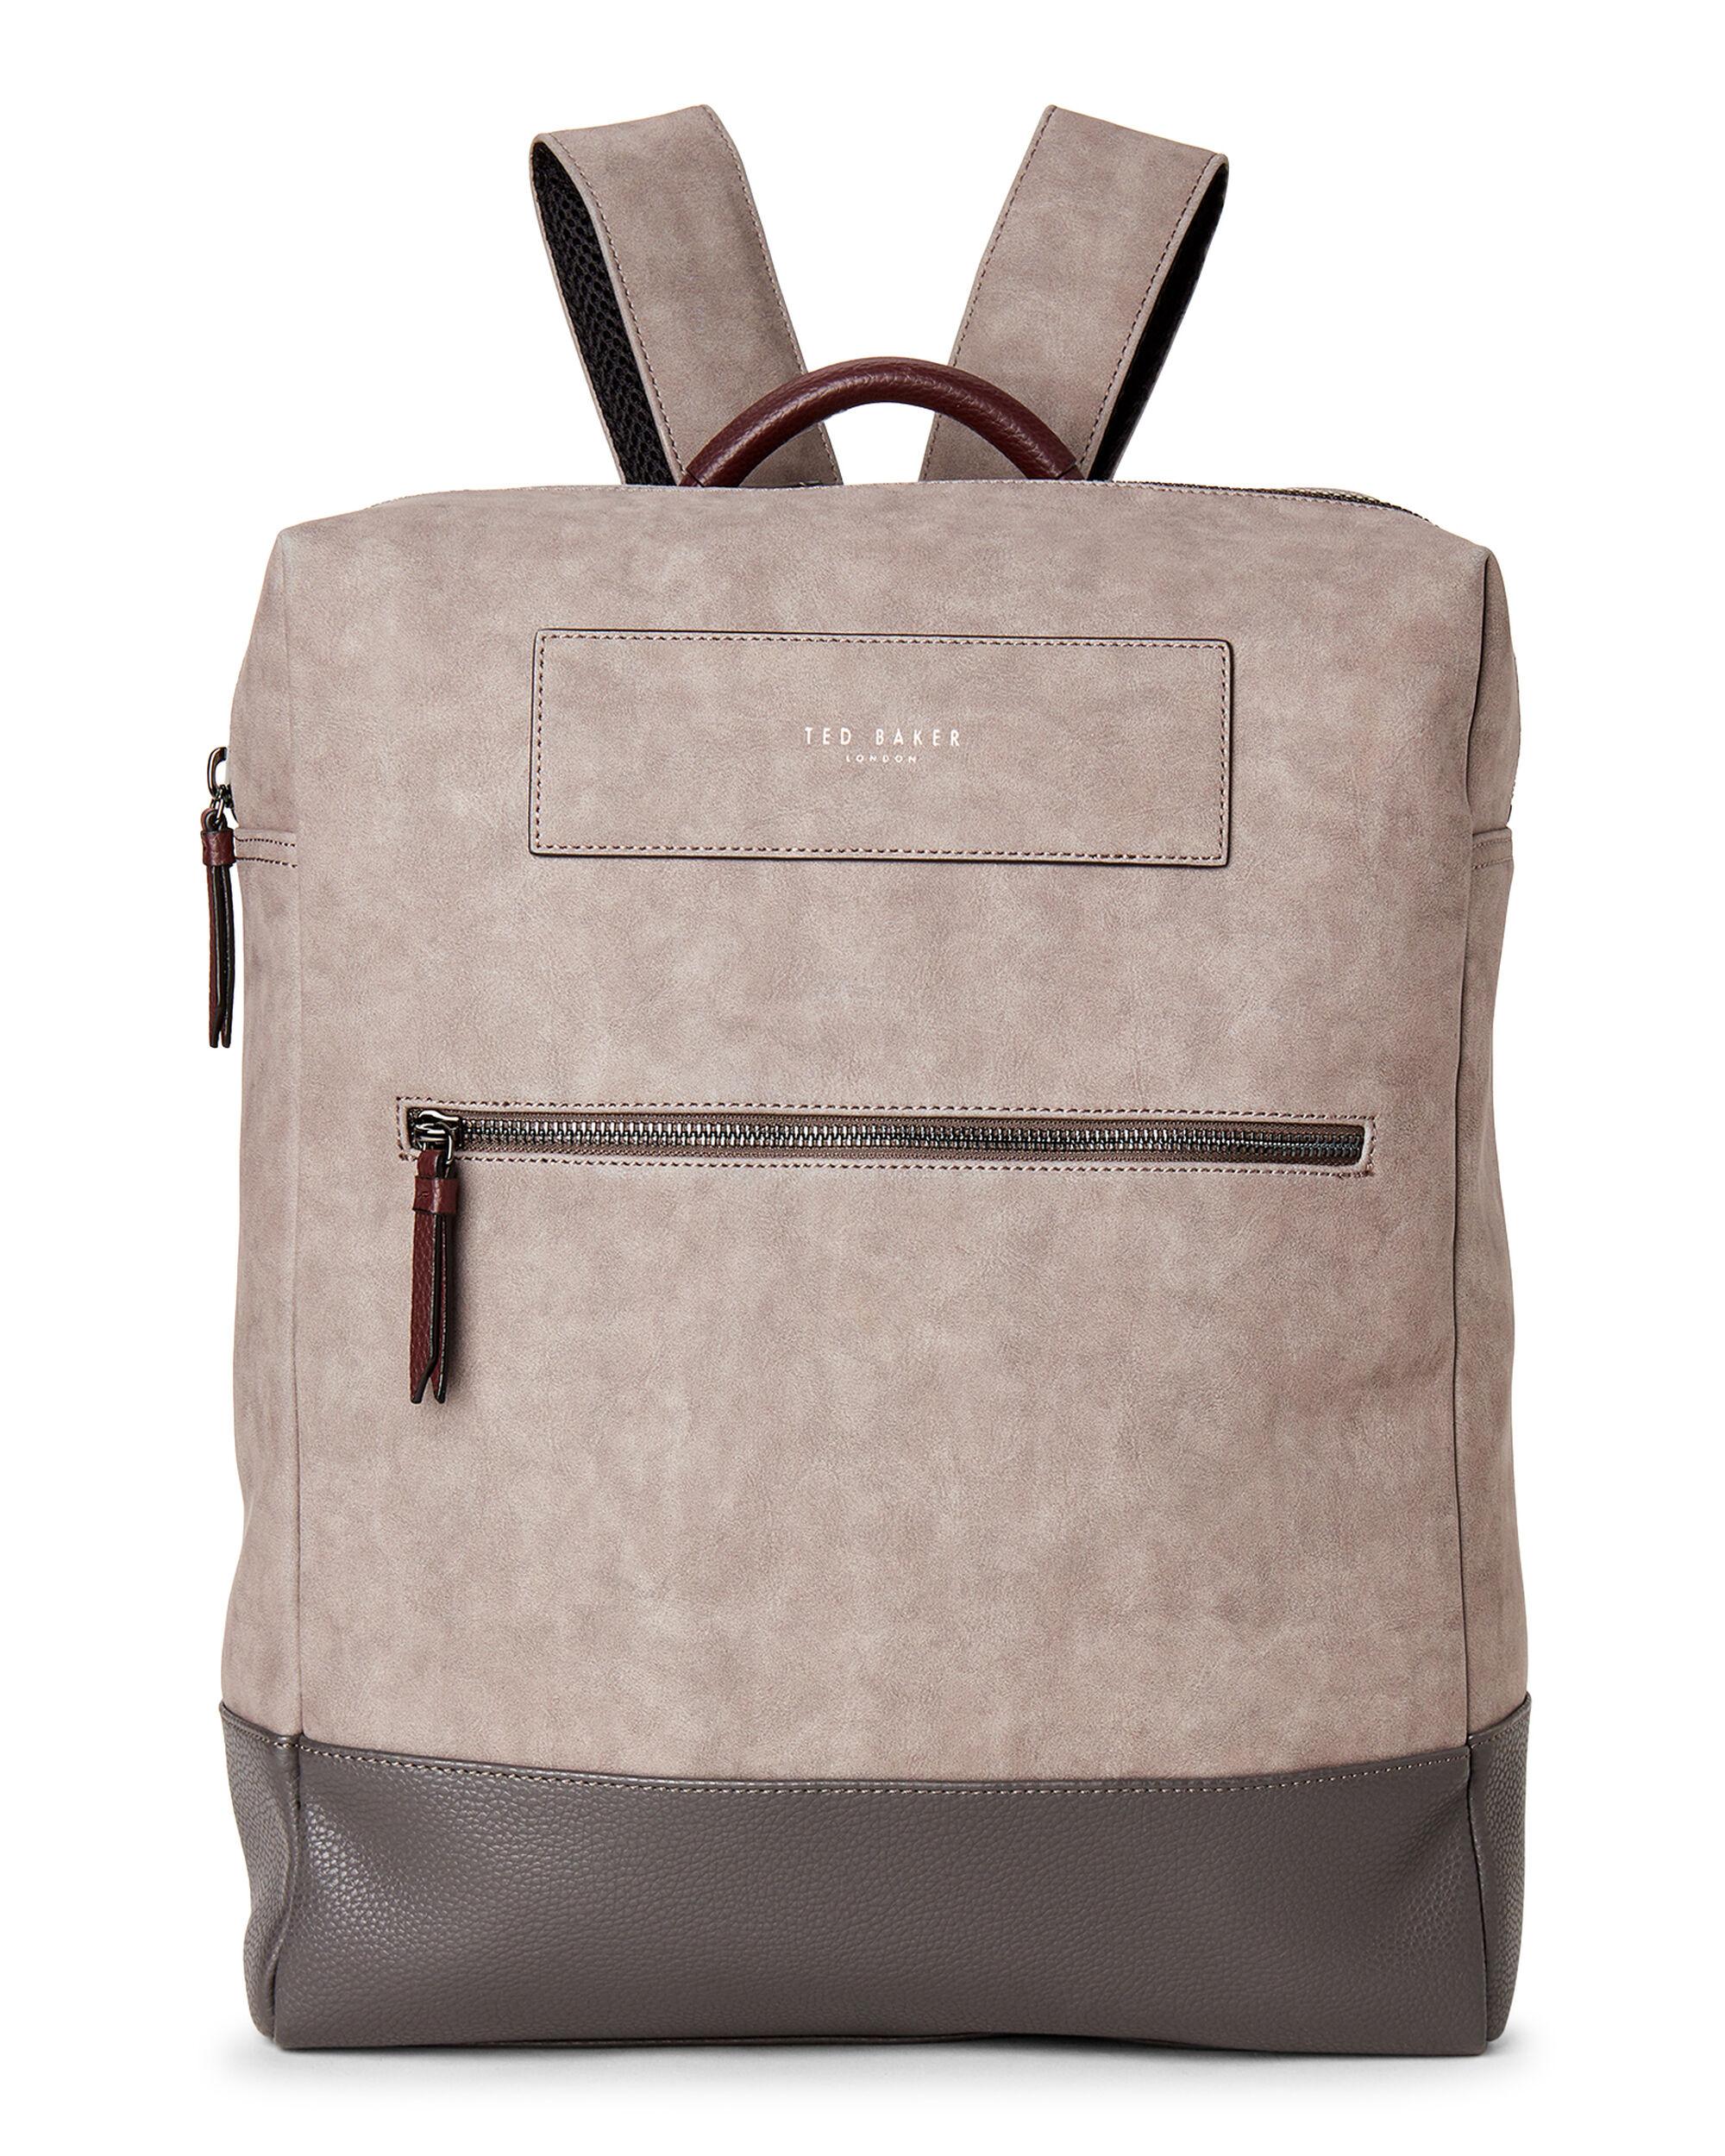 Ted Baker Synthetic Grey Kingz Backpack in Gray for Men - Lyst